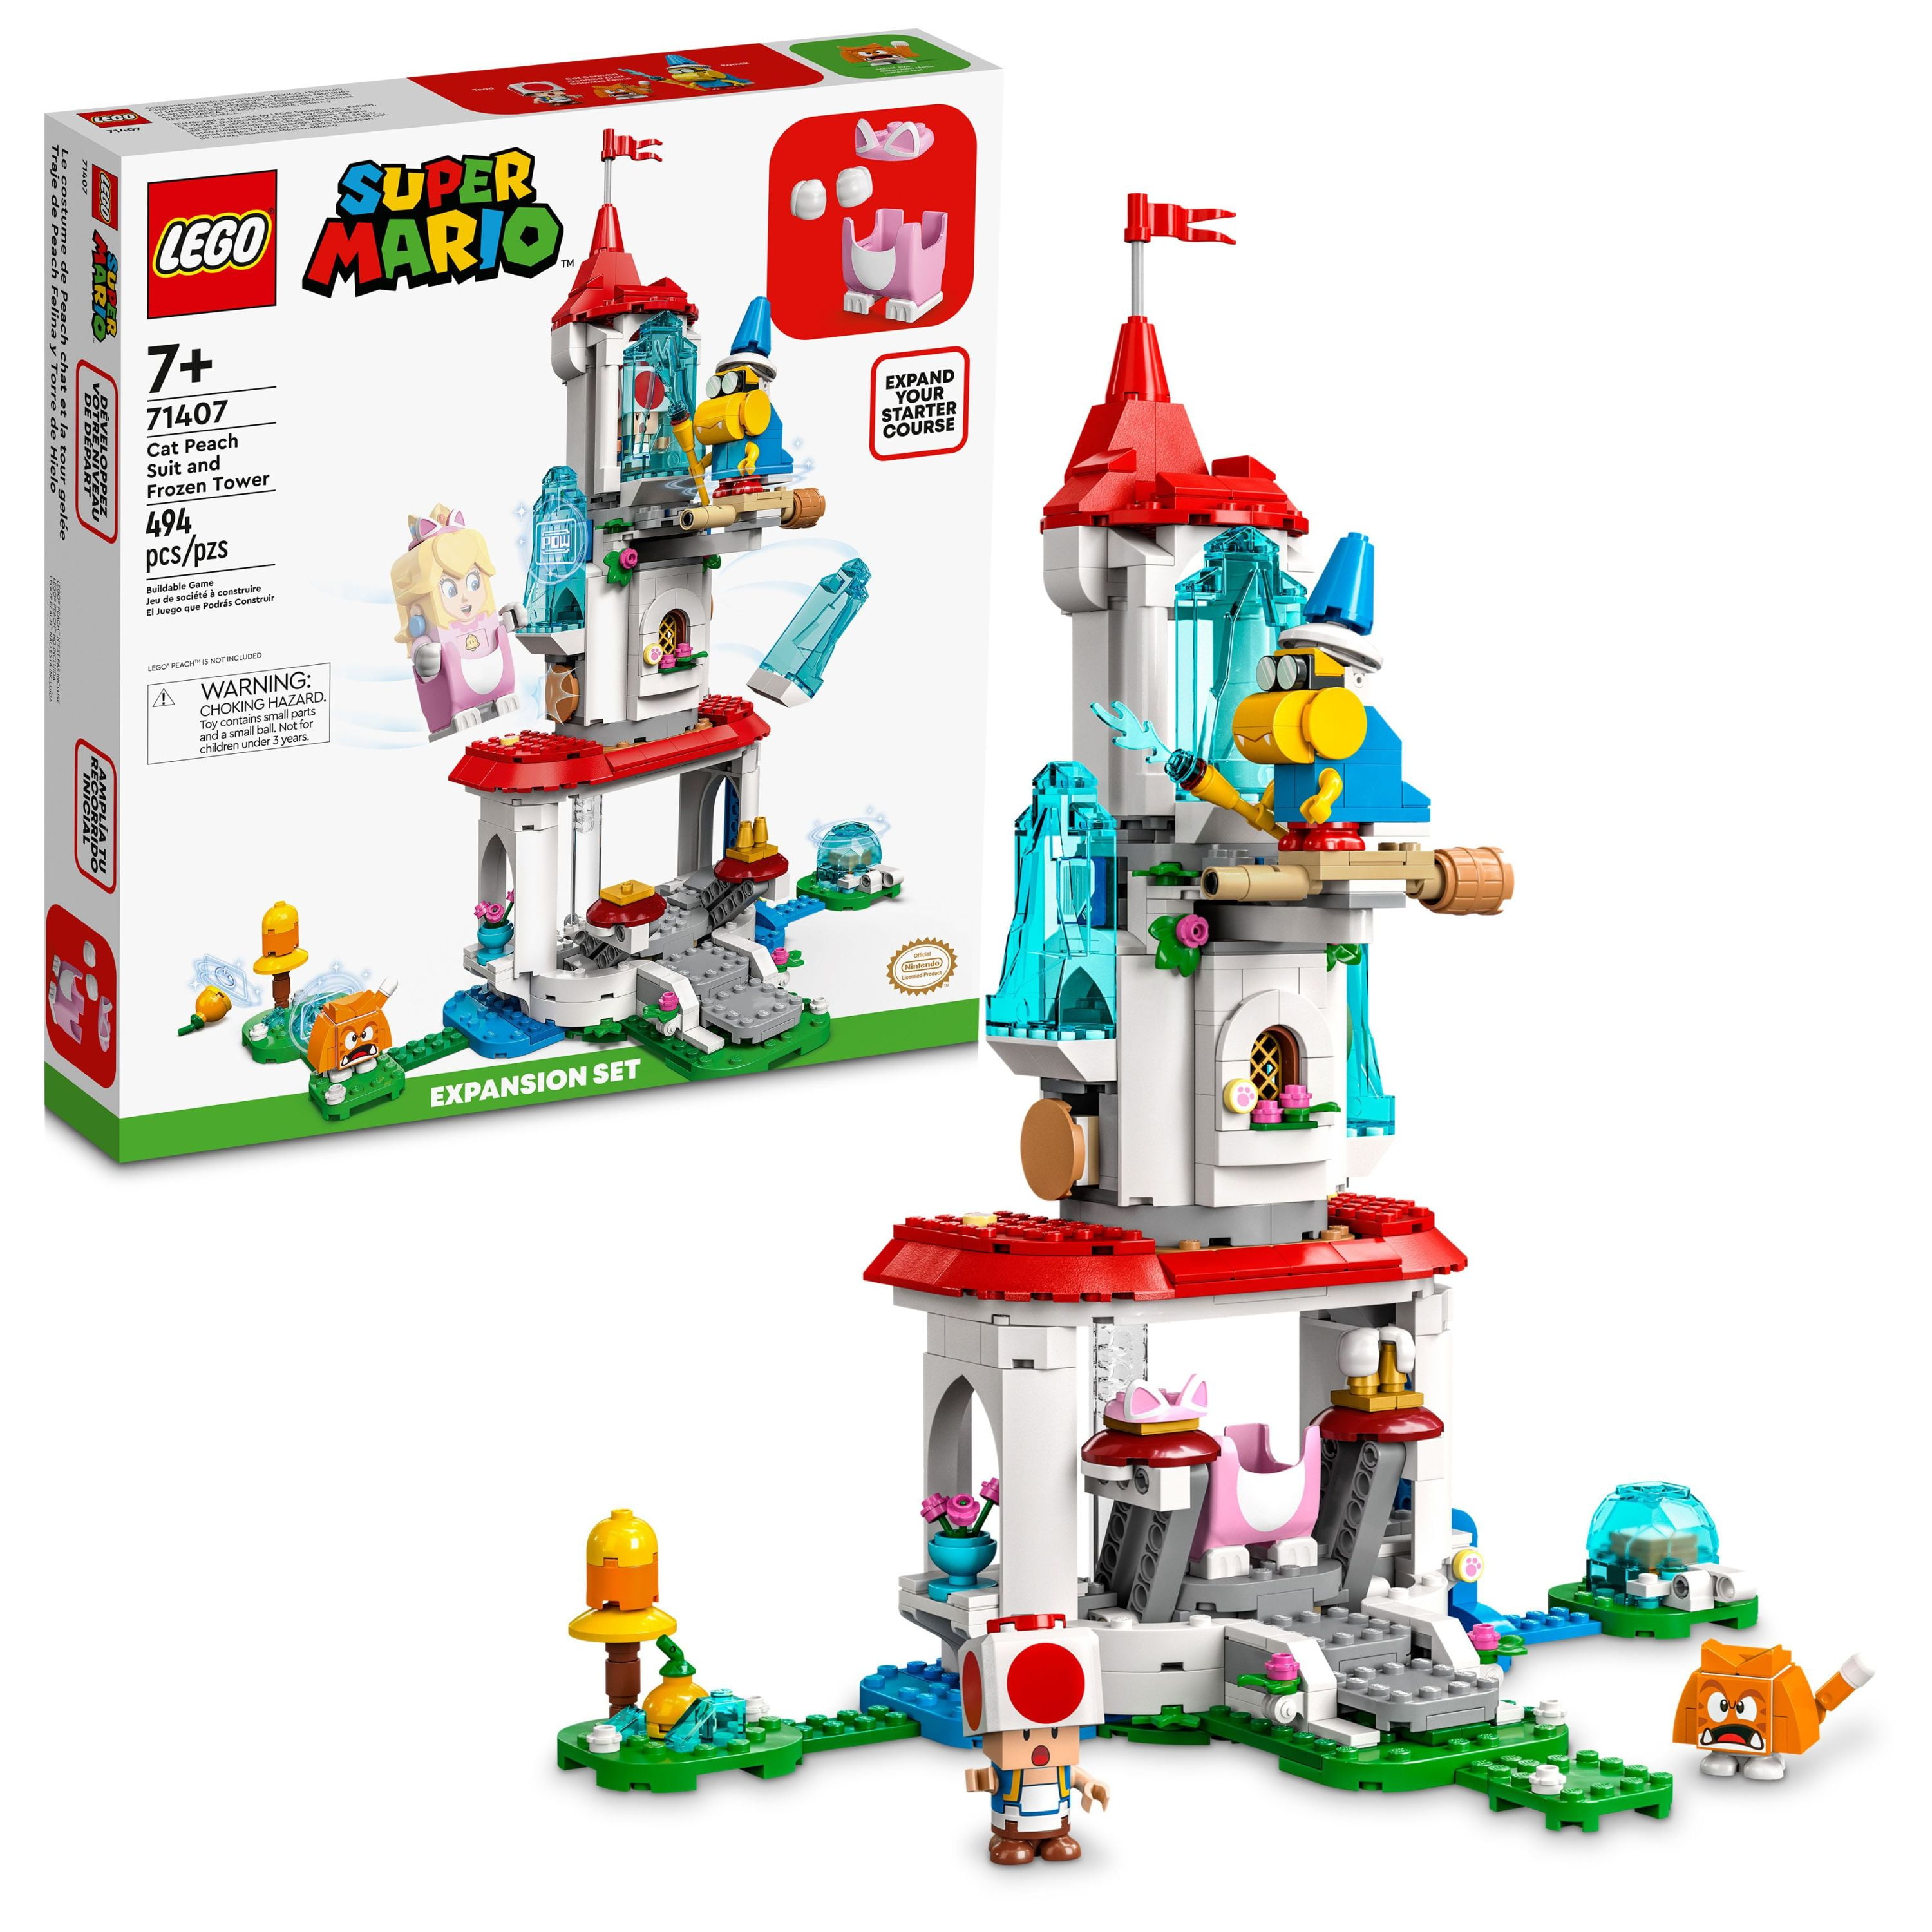 LEGO Super Mario Cat Peach Suit and Frozen Tower Expansion Set 71407, Buildable Game with Castle Toy and Costume, plus Kamek & Toad Figures